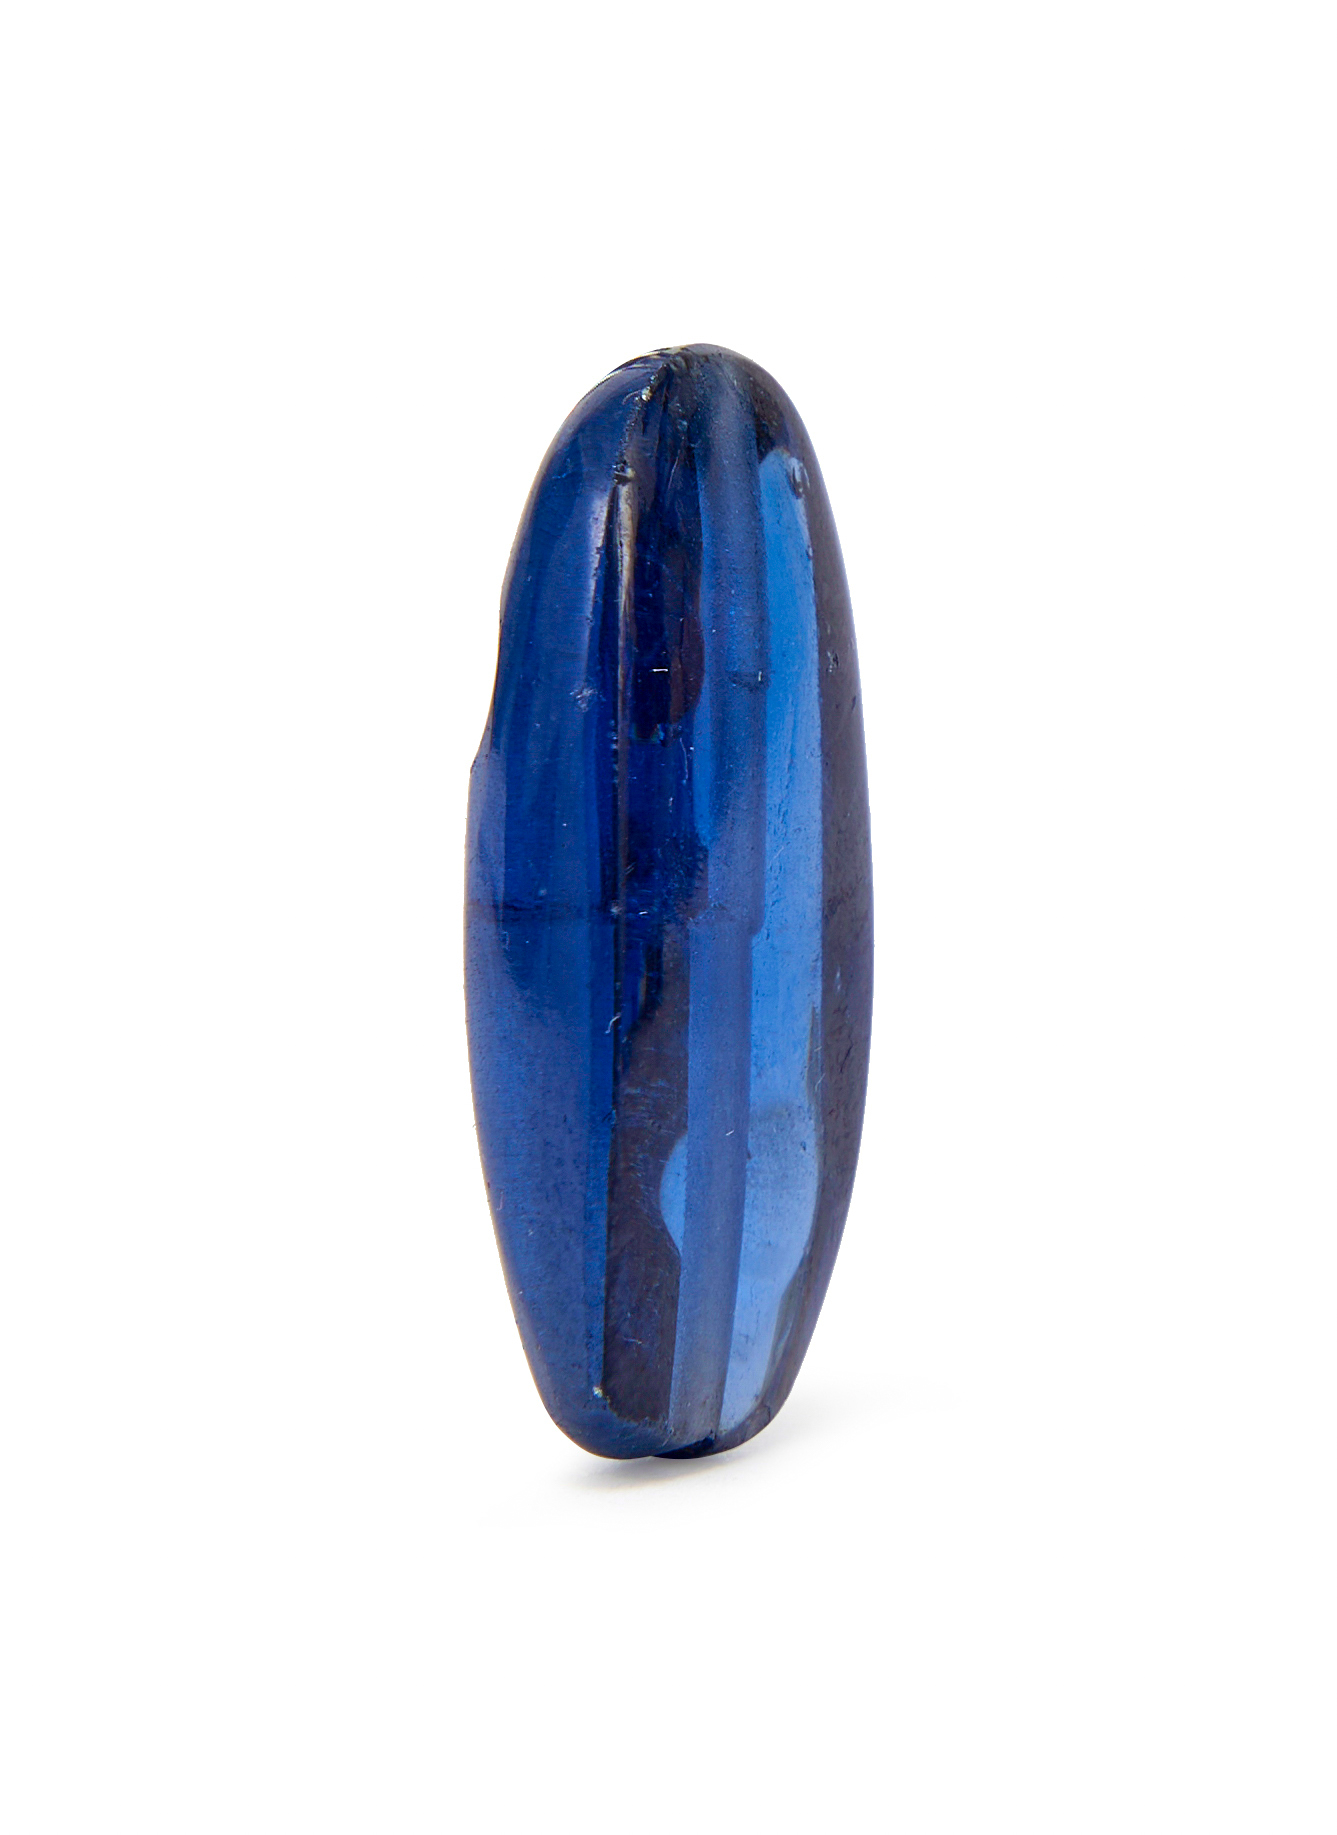 A BLUE GEMSTONE, PROBABLY SAPPHIRE, 19TH CENTURY OR EARLIER - Image 3 of 5